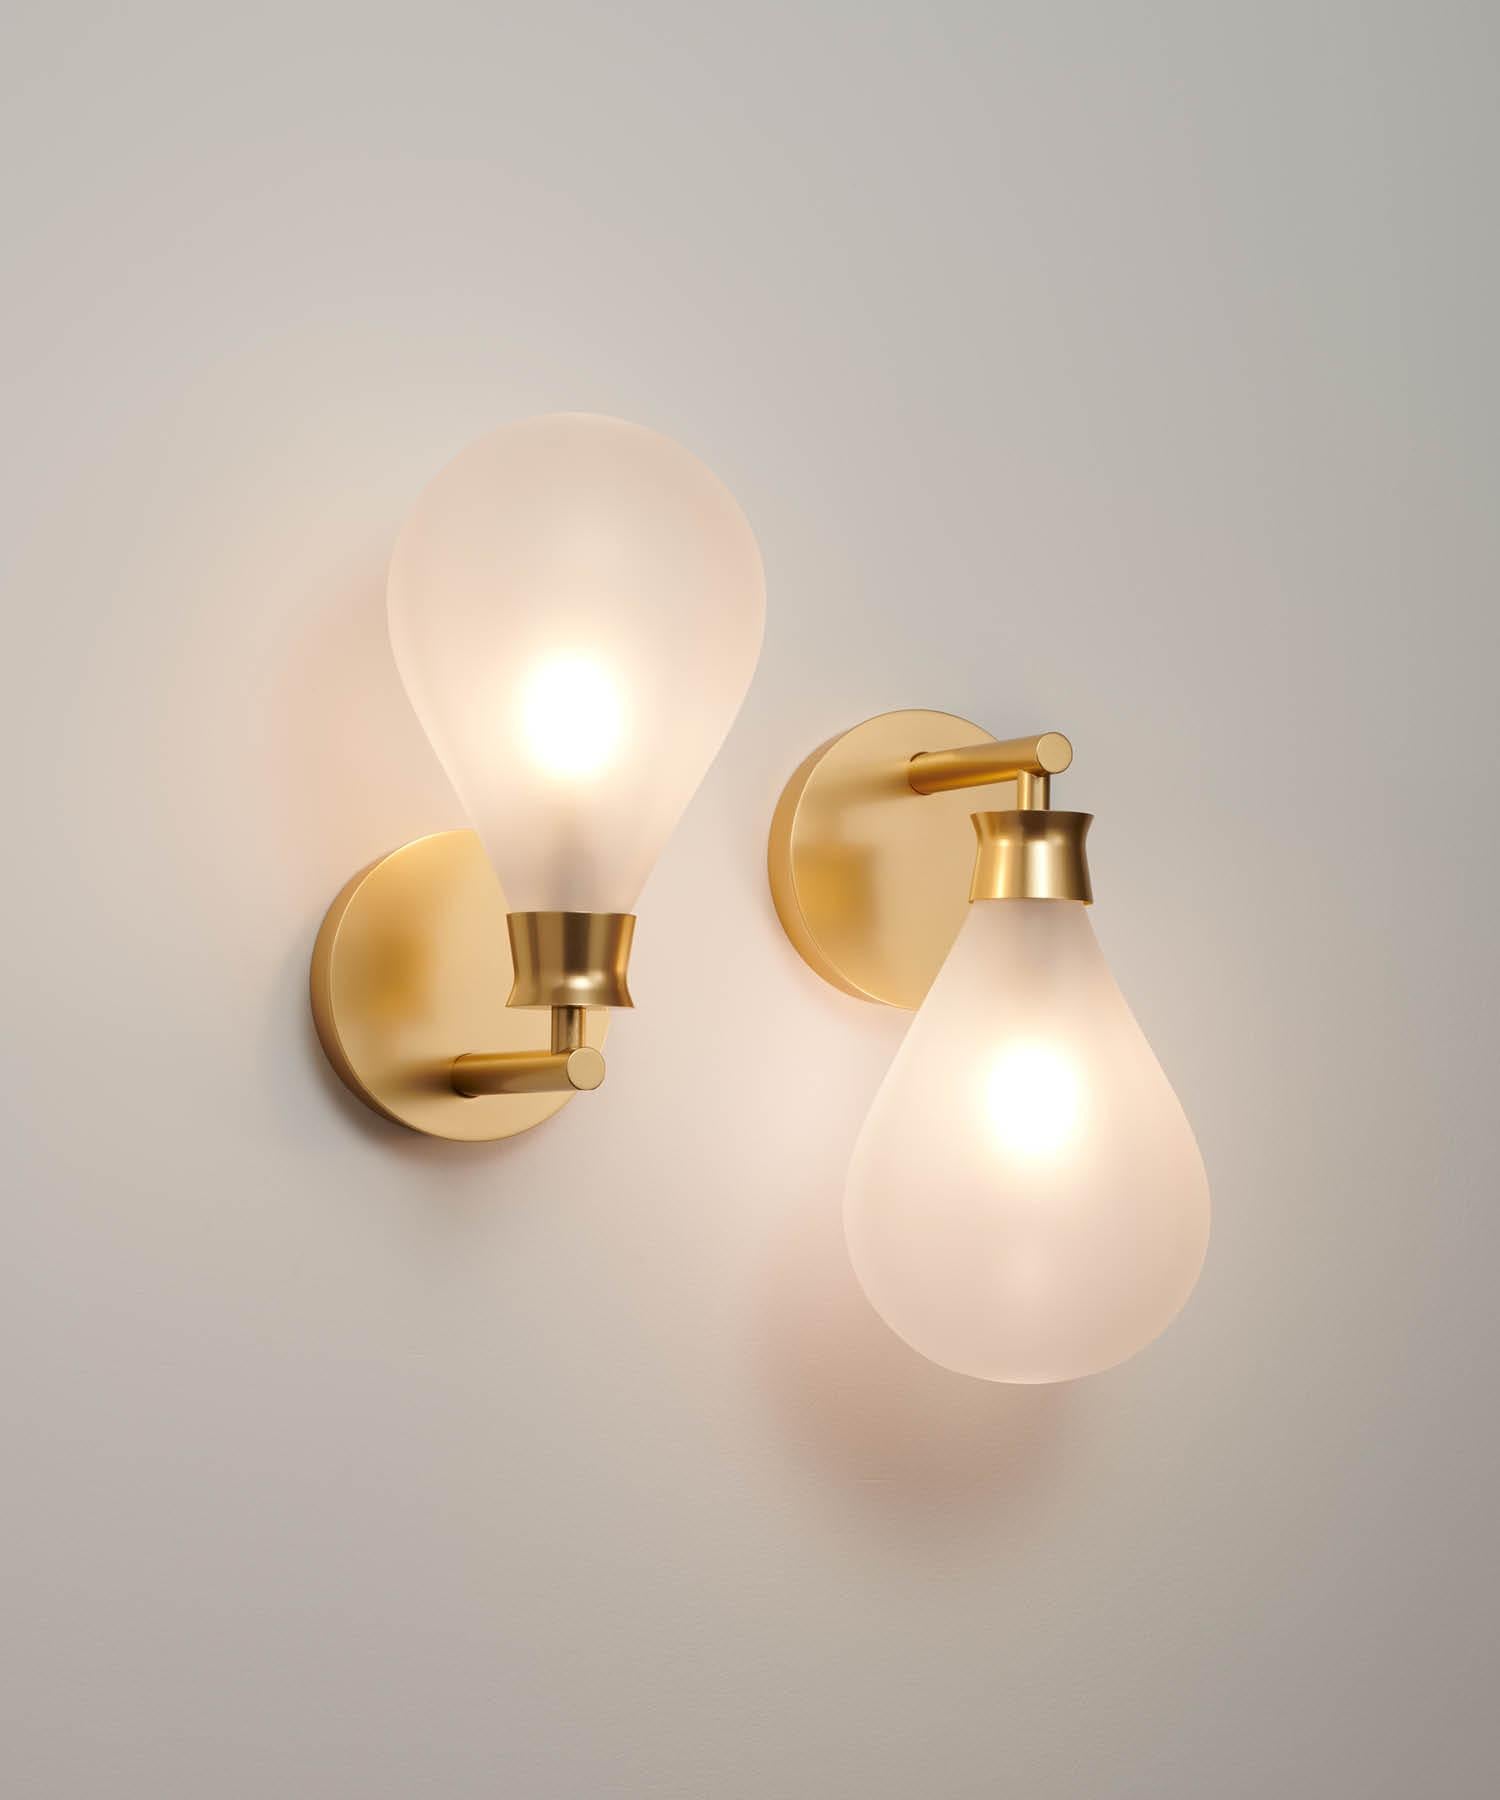 Contemporary Cintola Wall Light in Polished Aluminium with Frosted Handblown Glass Globe For Sale